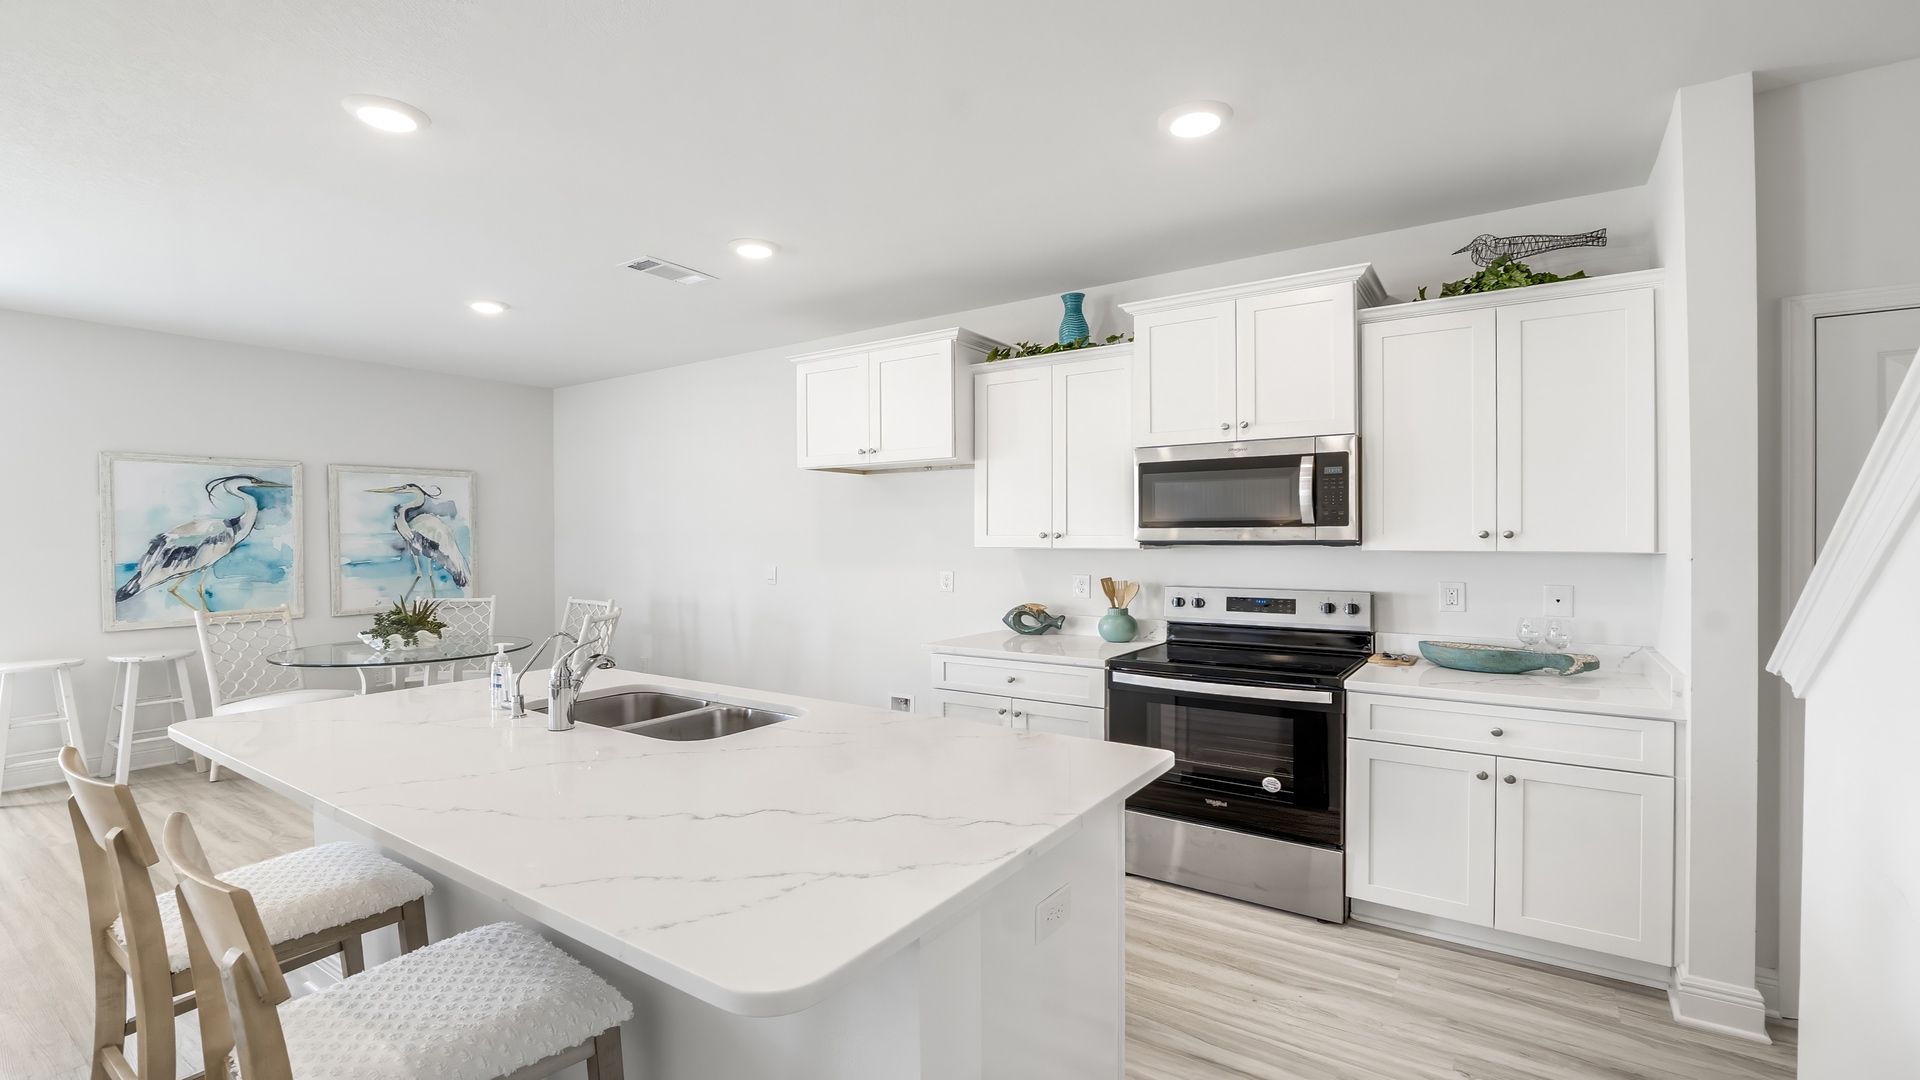 Furnished kitchen and dining room with white cabinets and quartz countertops and island.